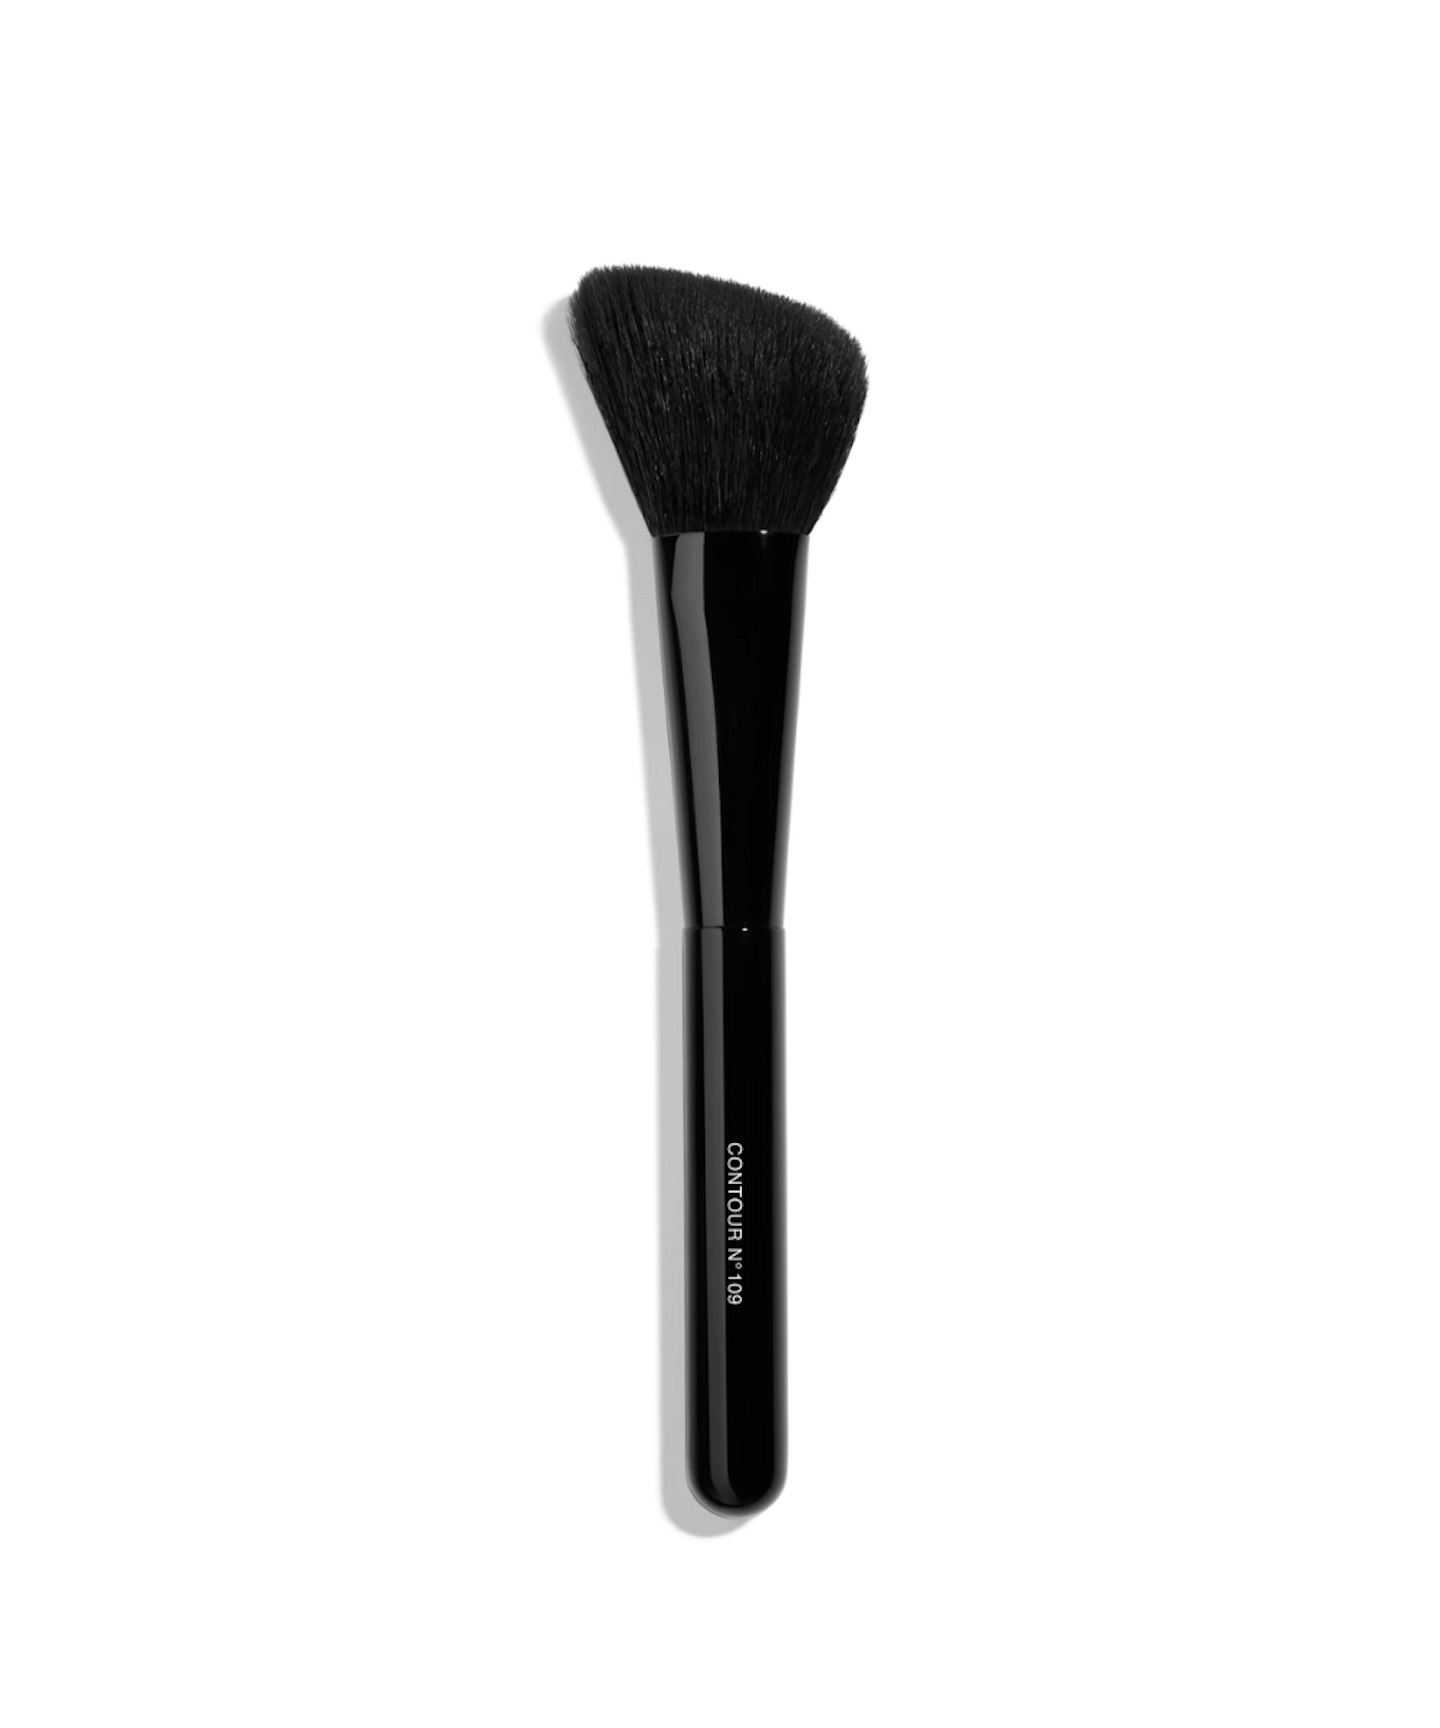 IT Cosmetics Heavenly Luxe You Sculpted! Contour & Highlight Brush